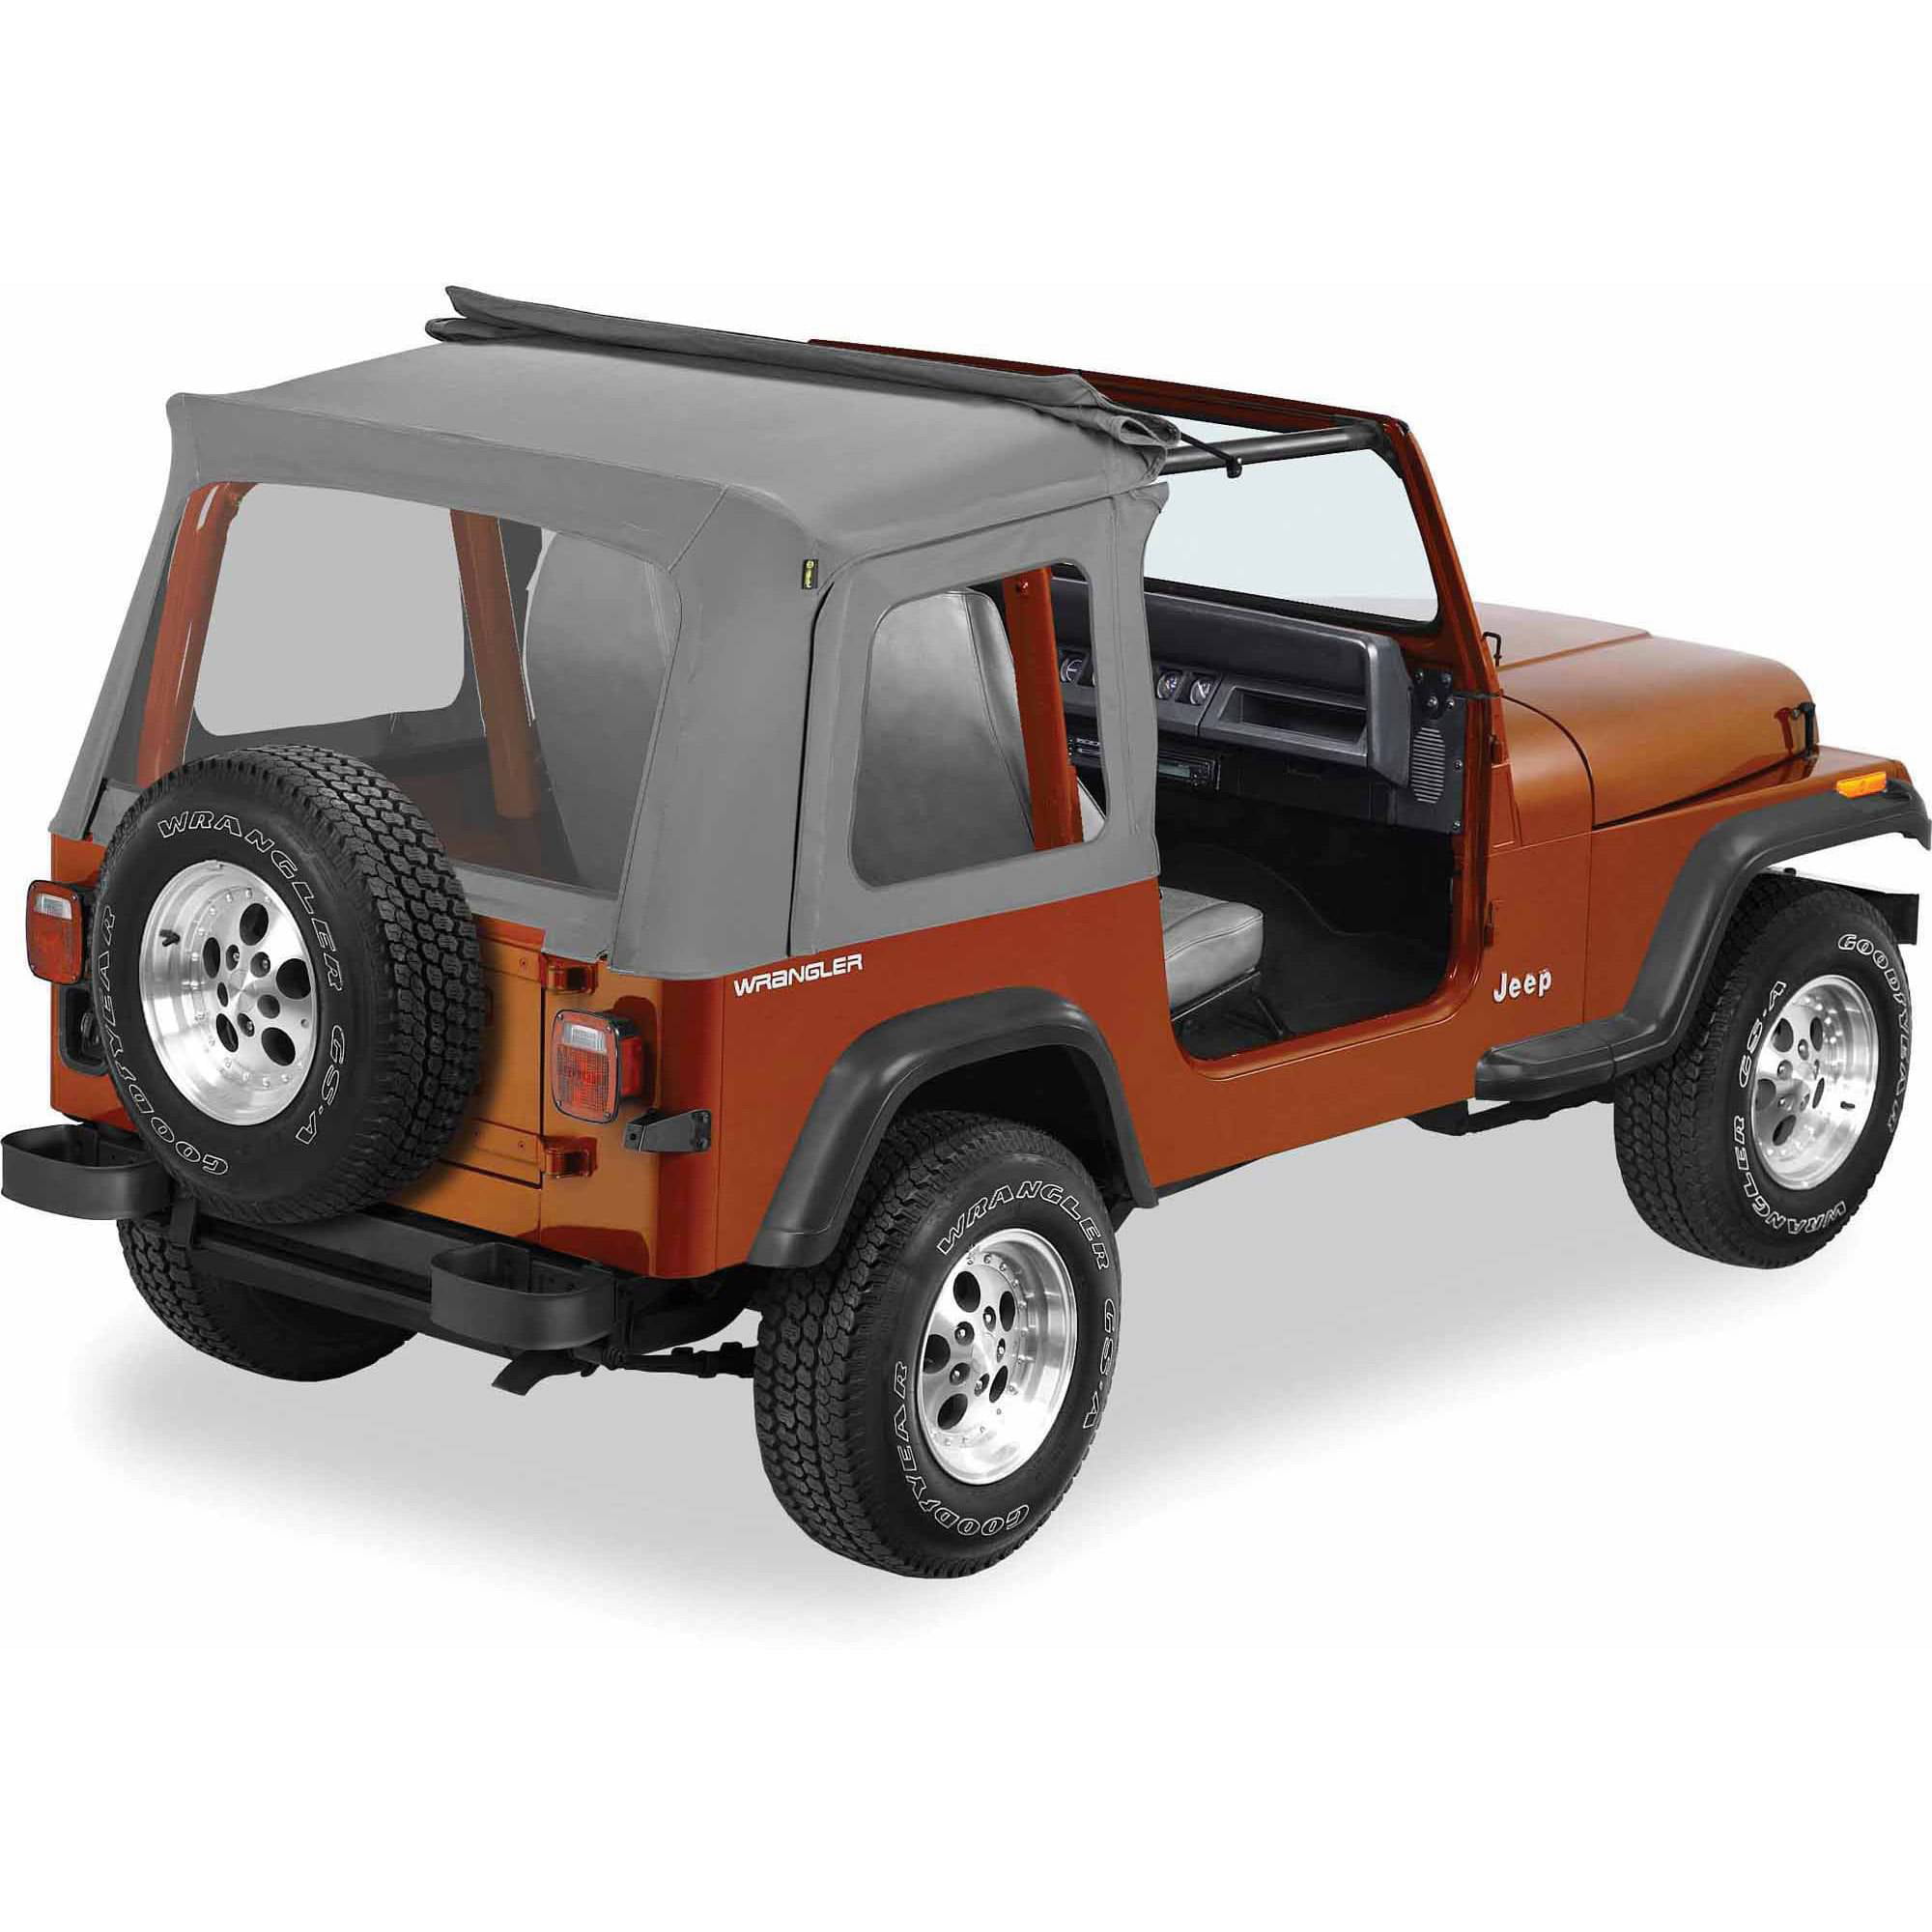 Bestop 51698-09 Jeep Cj7/Wrangler Sunrider Replacement Top with Clear  Windows, Charcoal 